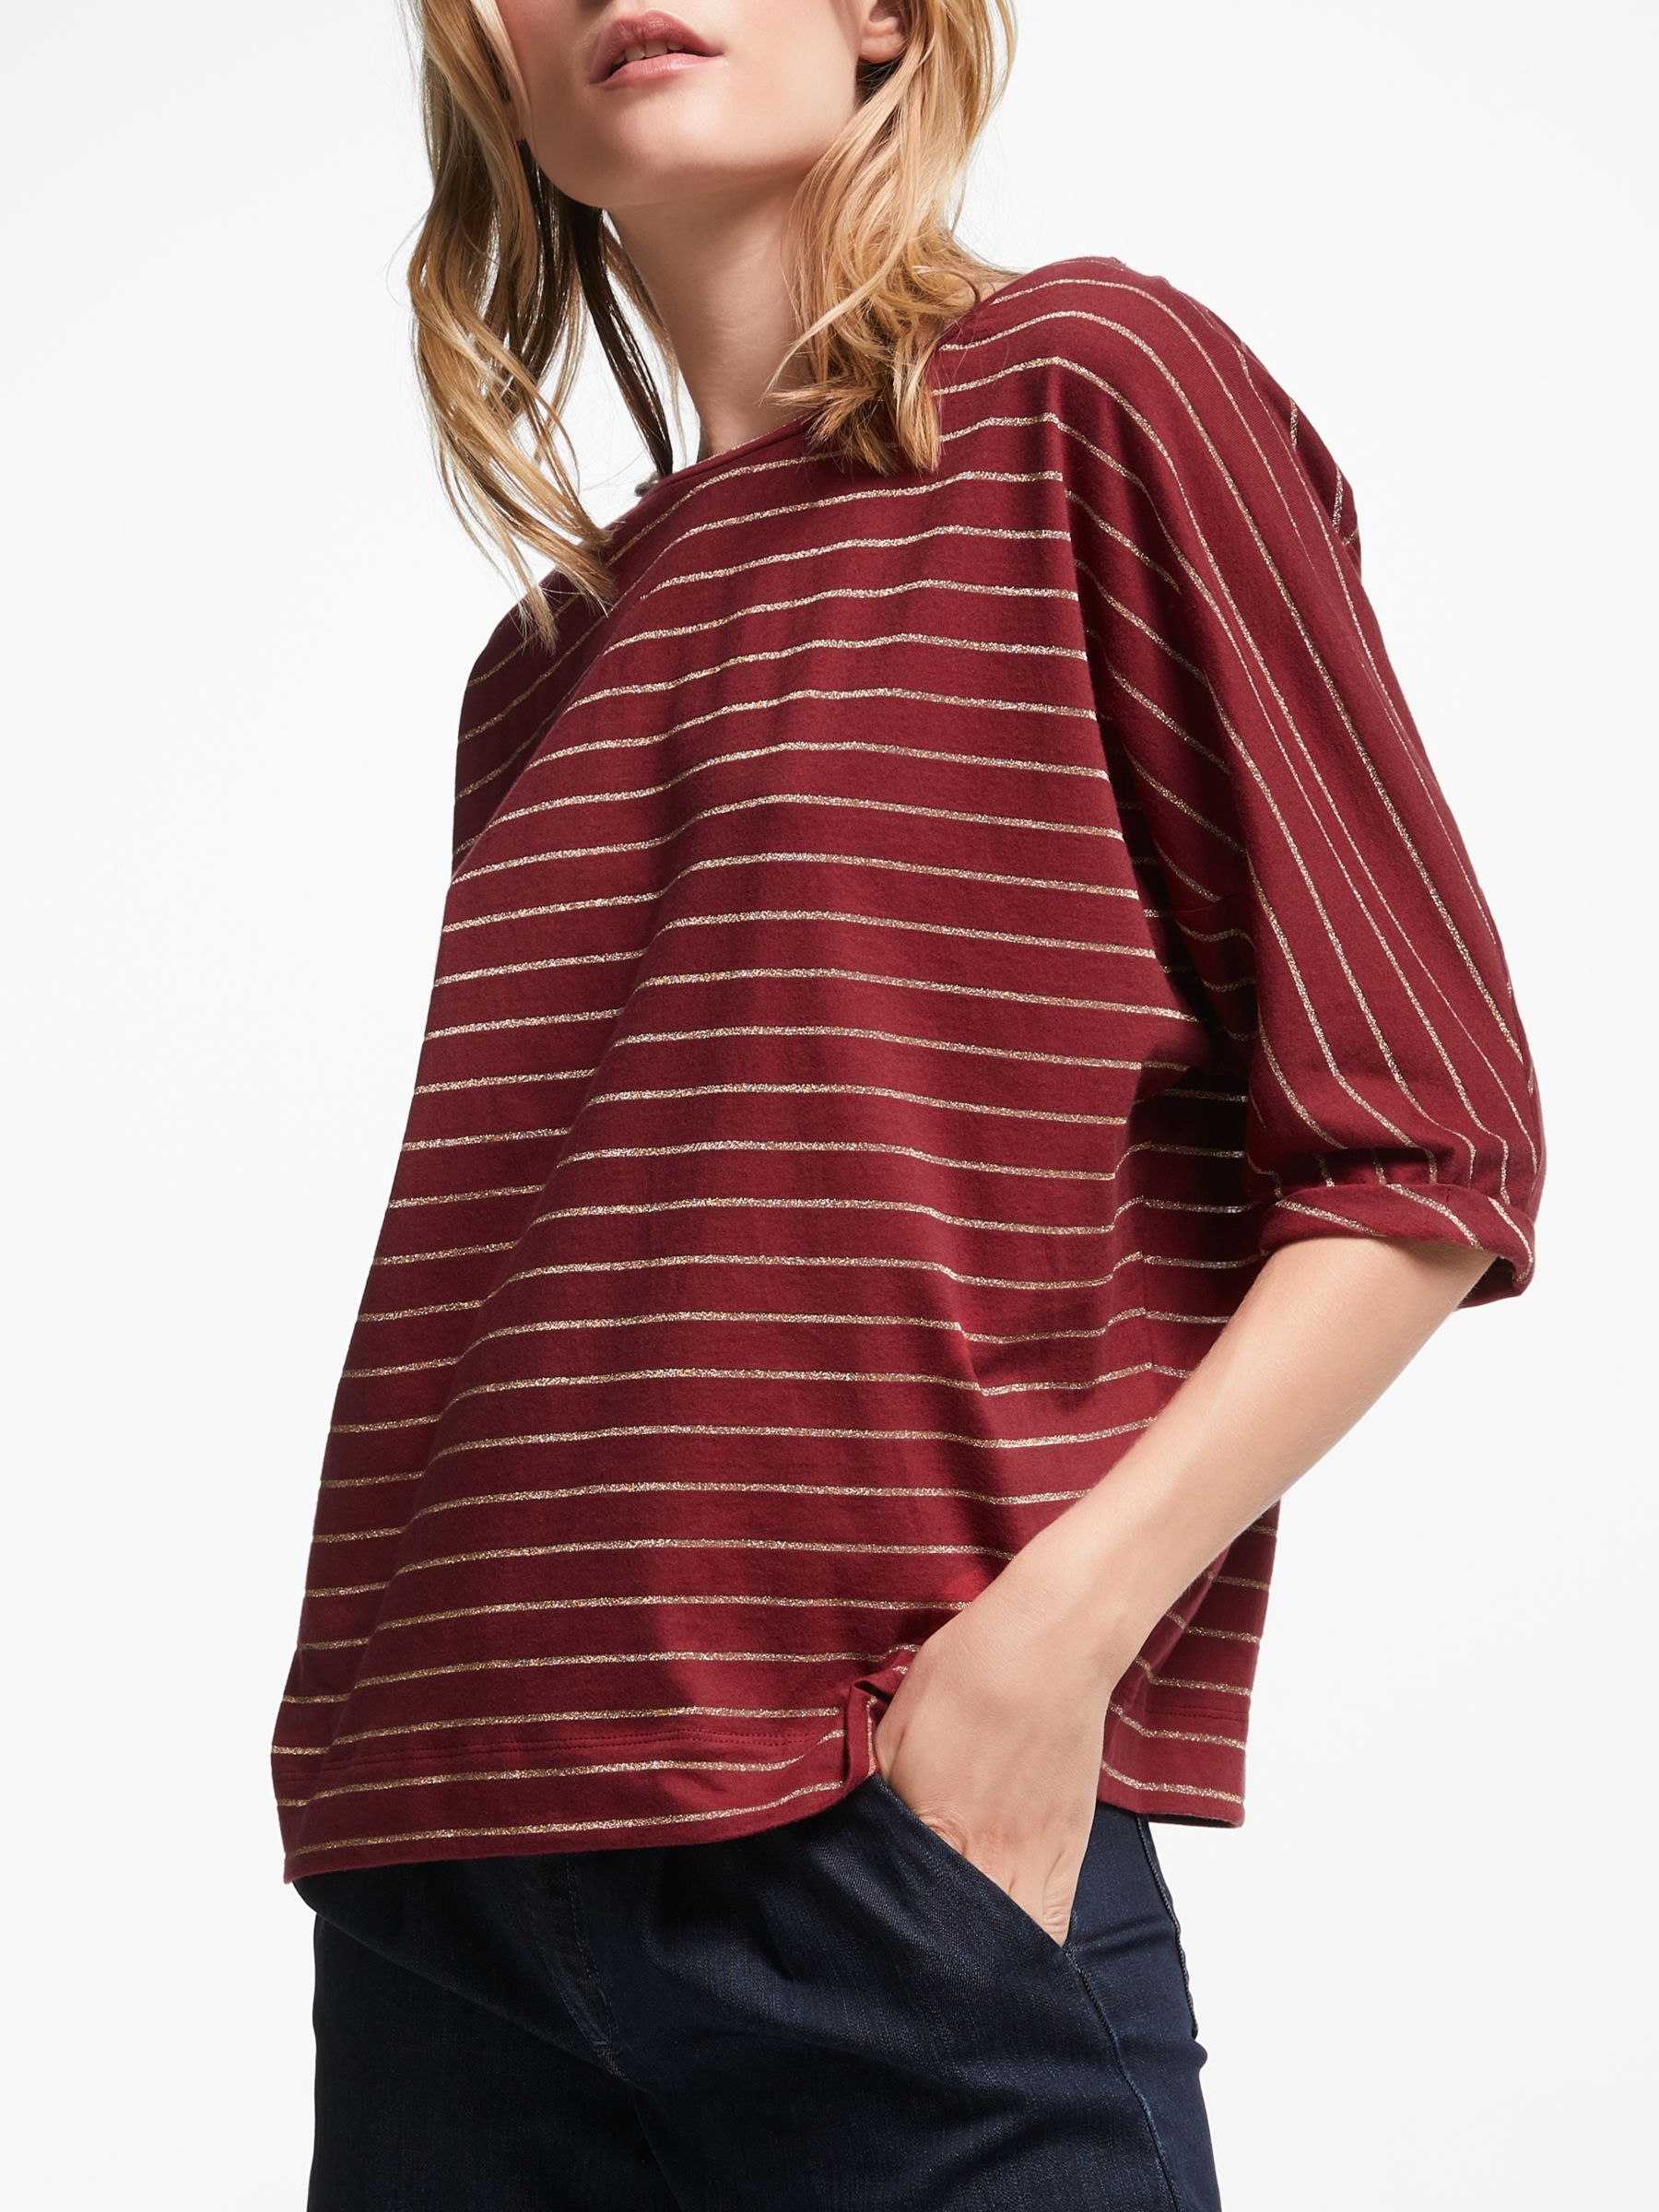 AND/OR Metallic Stripe Jersey T-Shirt, Red/Gold